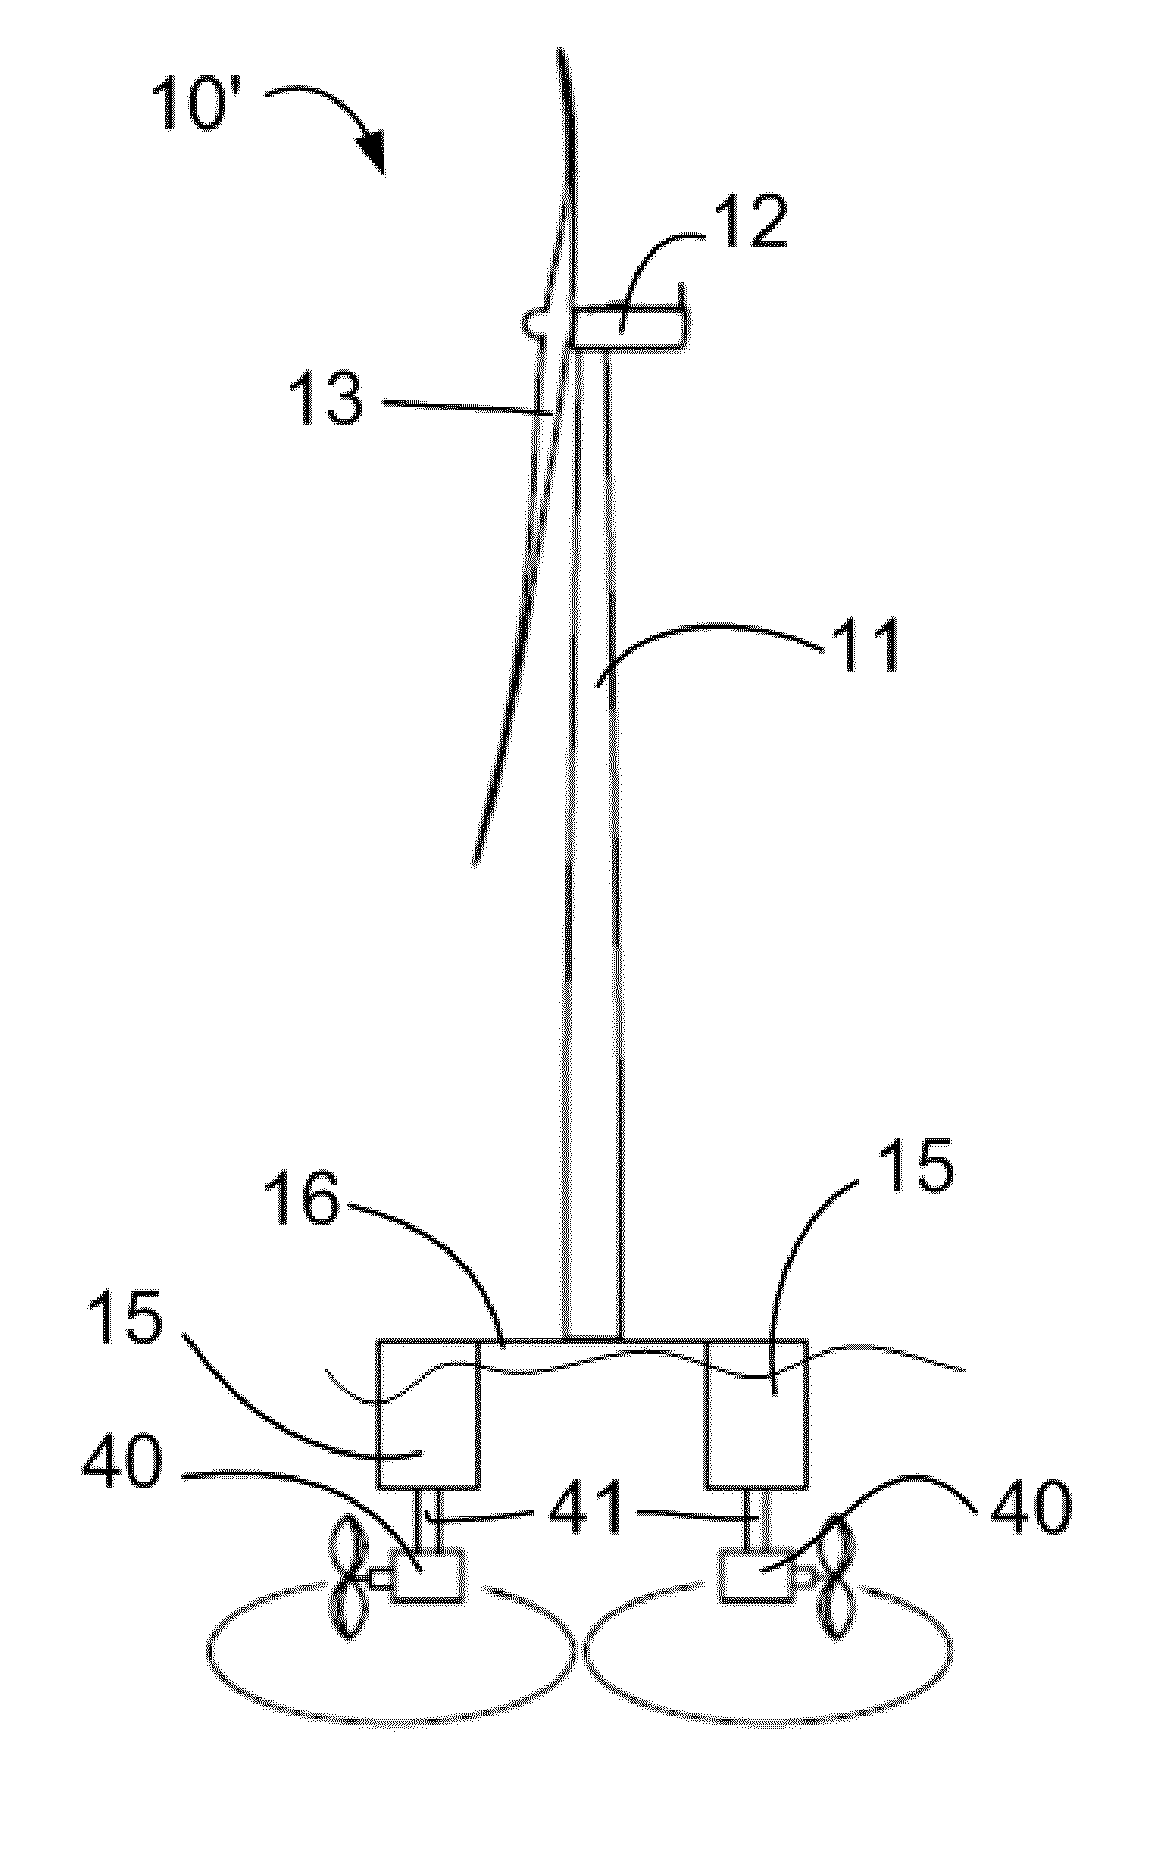 Method for reducing oscillations in offshore wind turbines